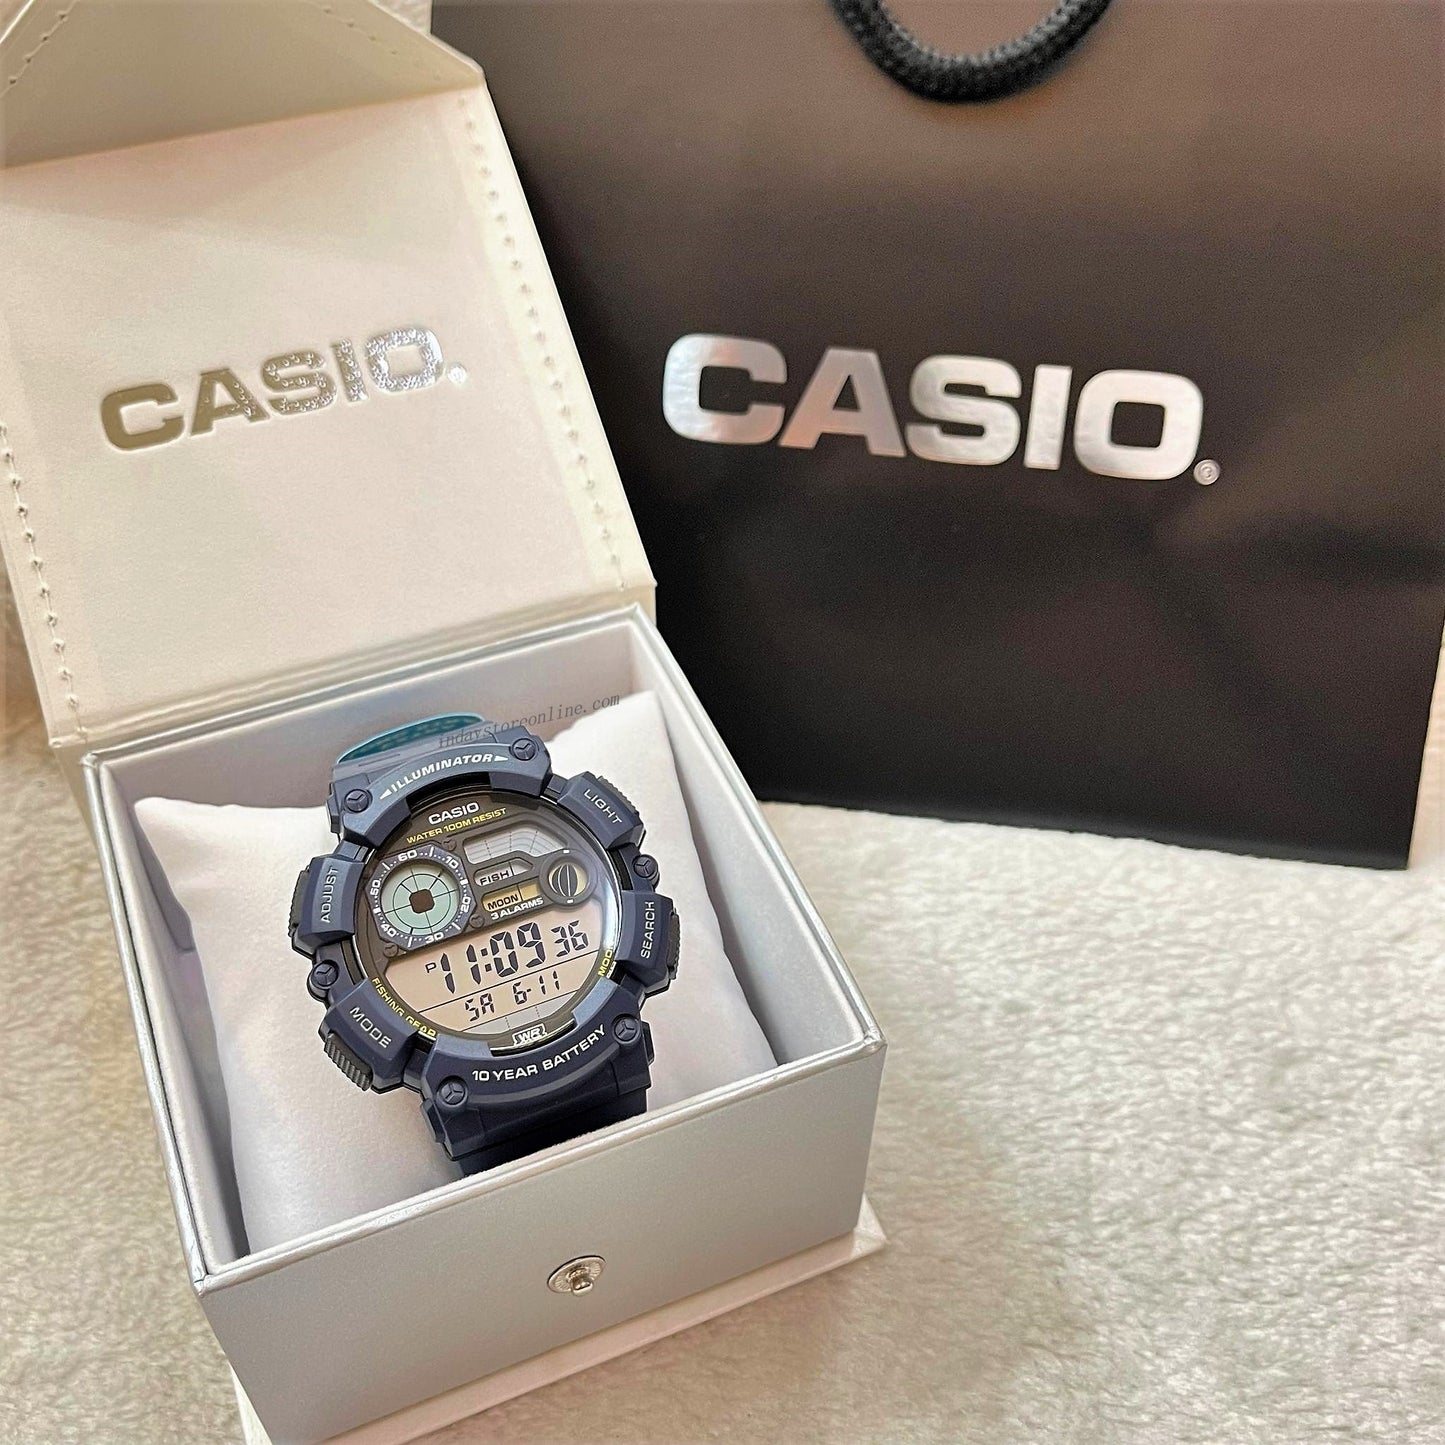 Casio Digital Men's Watch WS-1500H-2A Digital Resin Band Resin Glass Battery life: 10 years